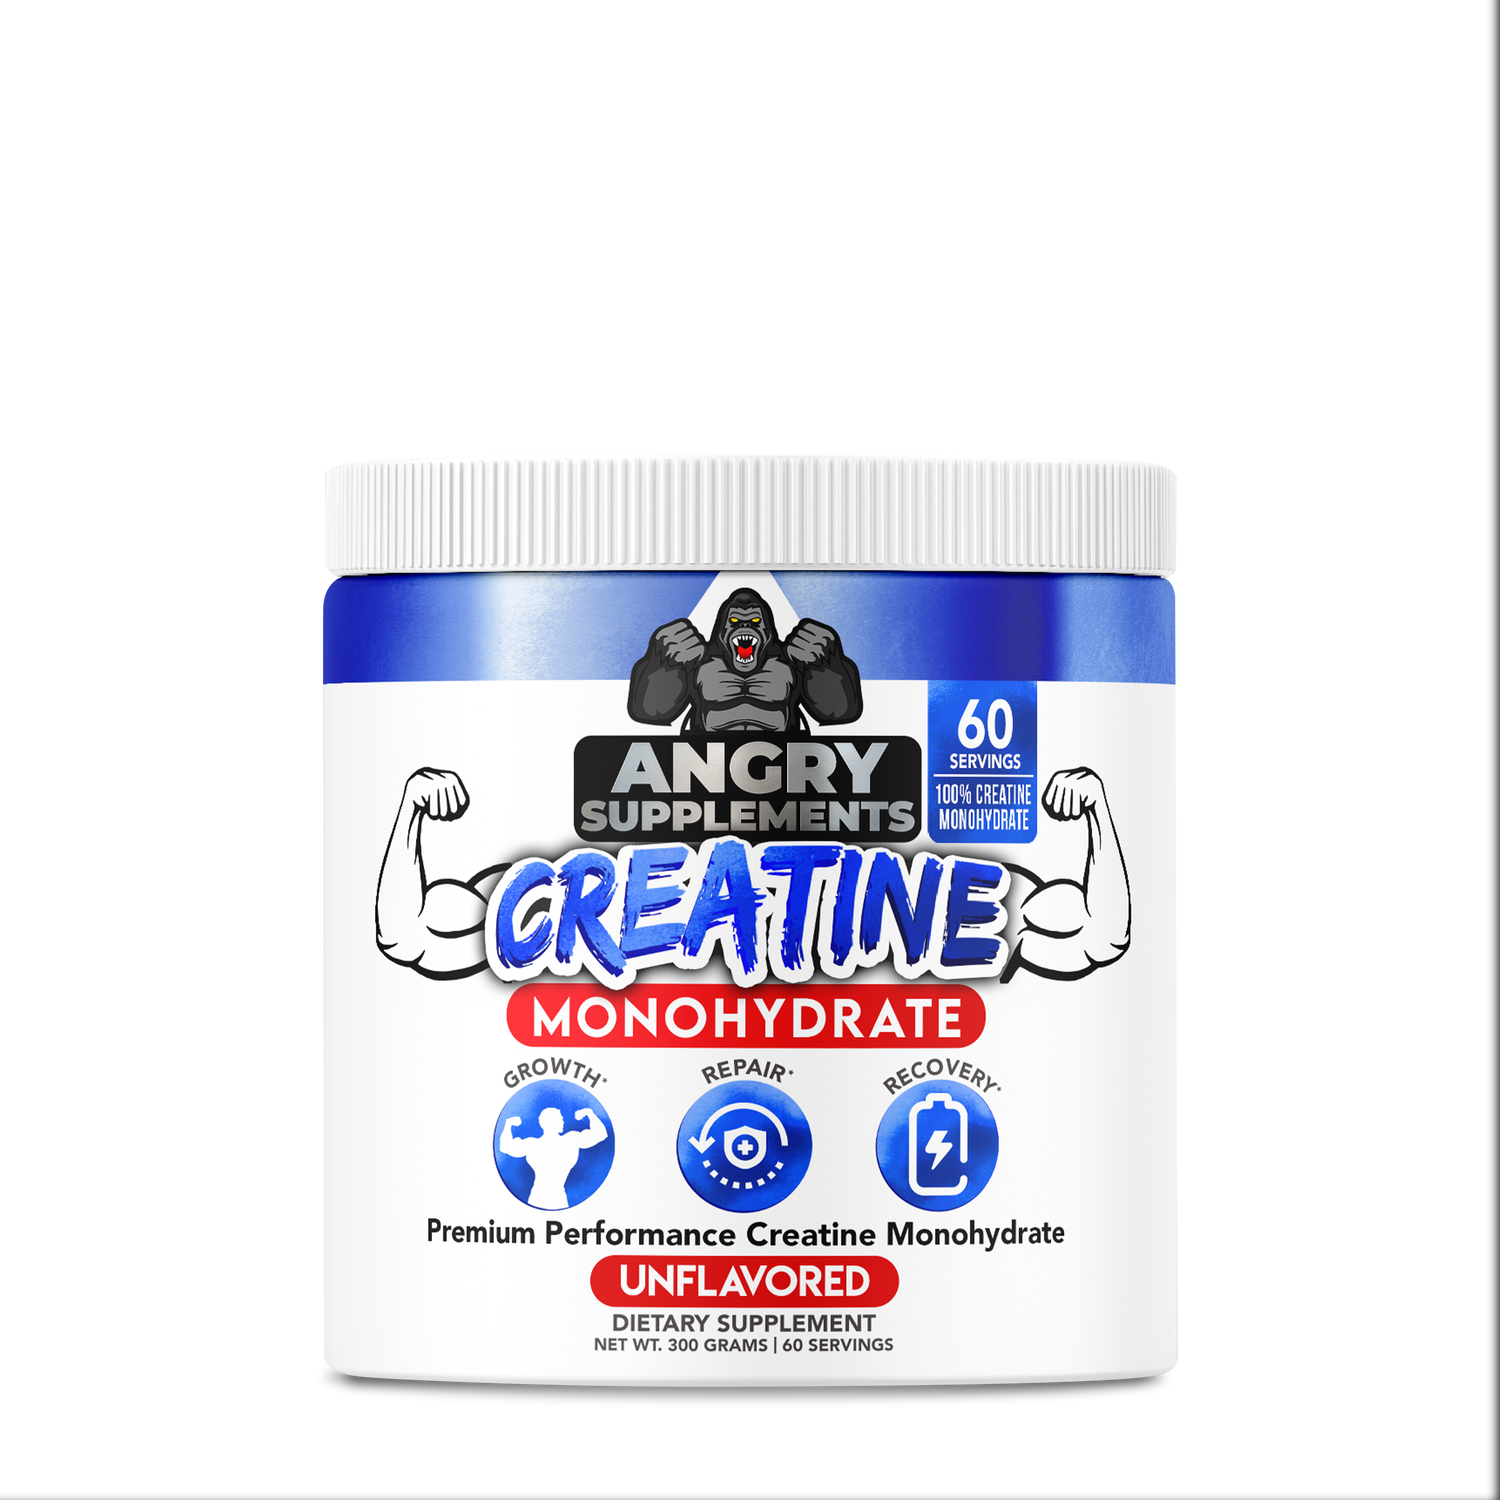 Angry Supplements Creatine Monohydrate - Unflavored (60 Servings)